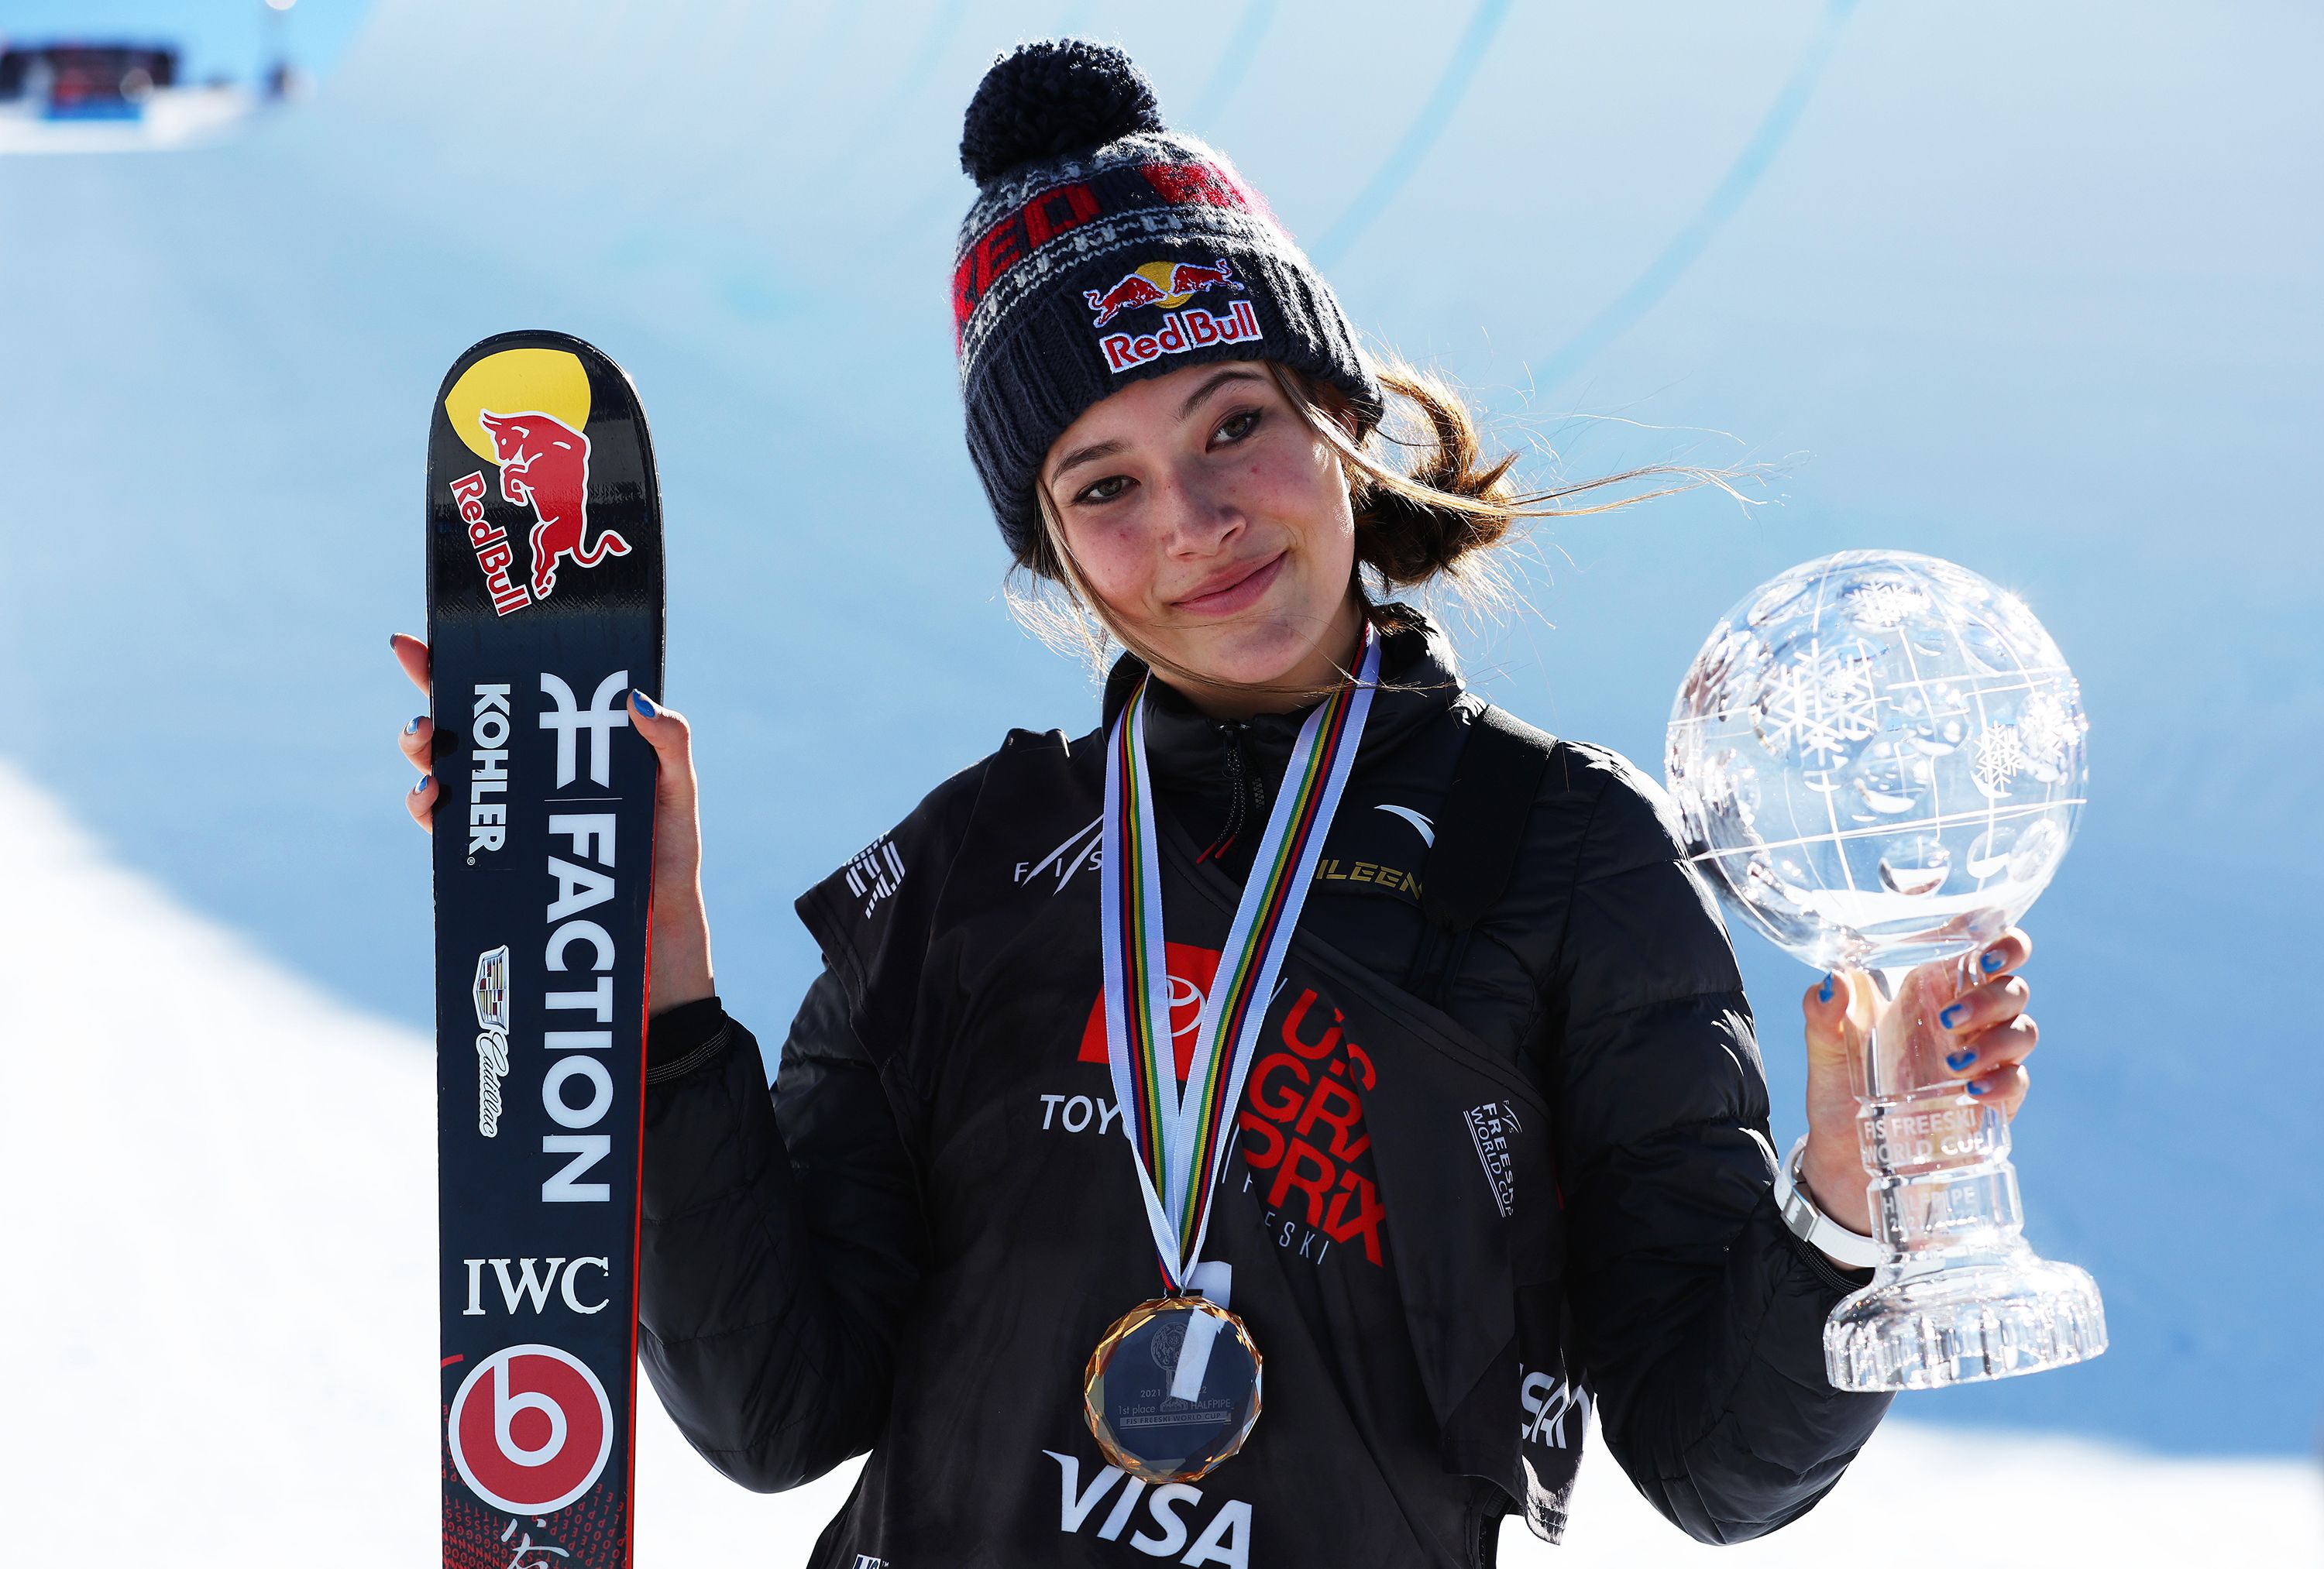 China's Freestyle Medal Hope Is American-born skier-model Eileen Gu